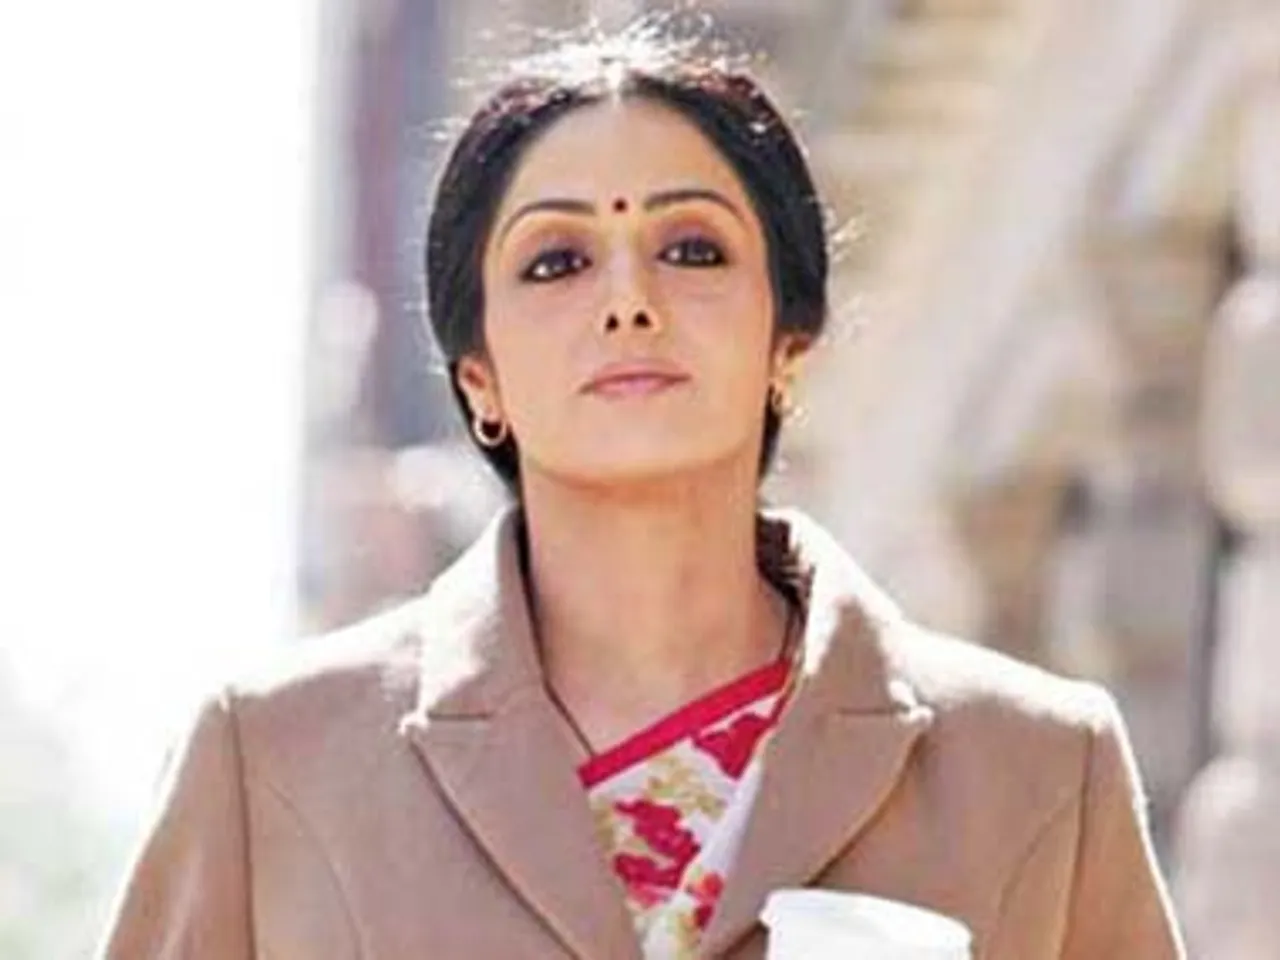 Sridevi 'Accidentally Drowned' In Hotel Bathtub: Forensic Report